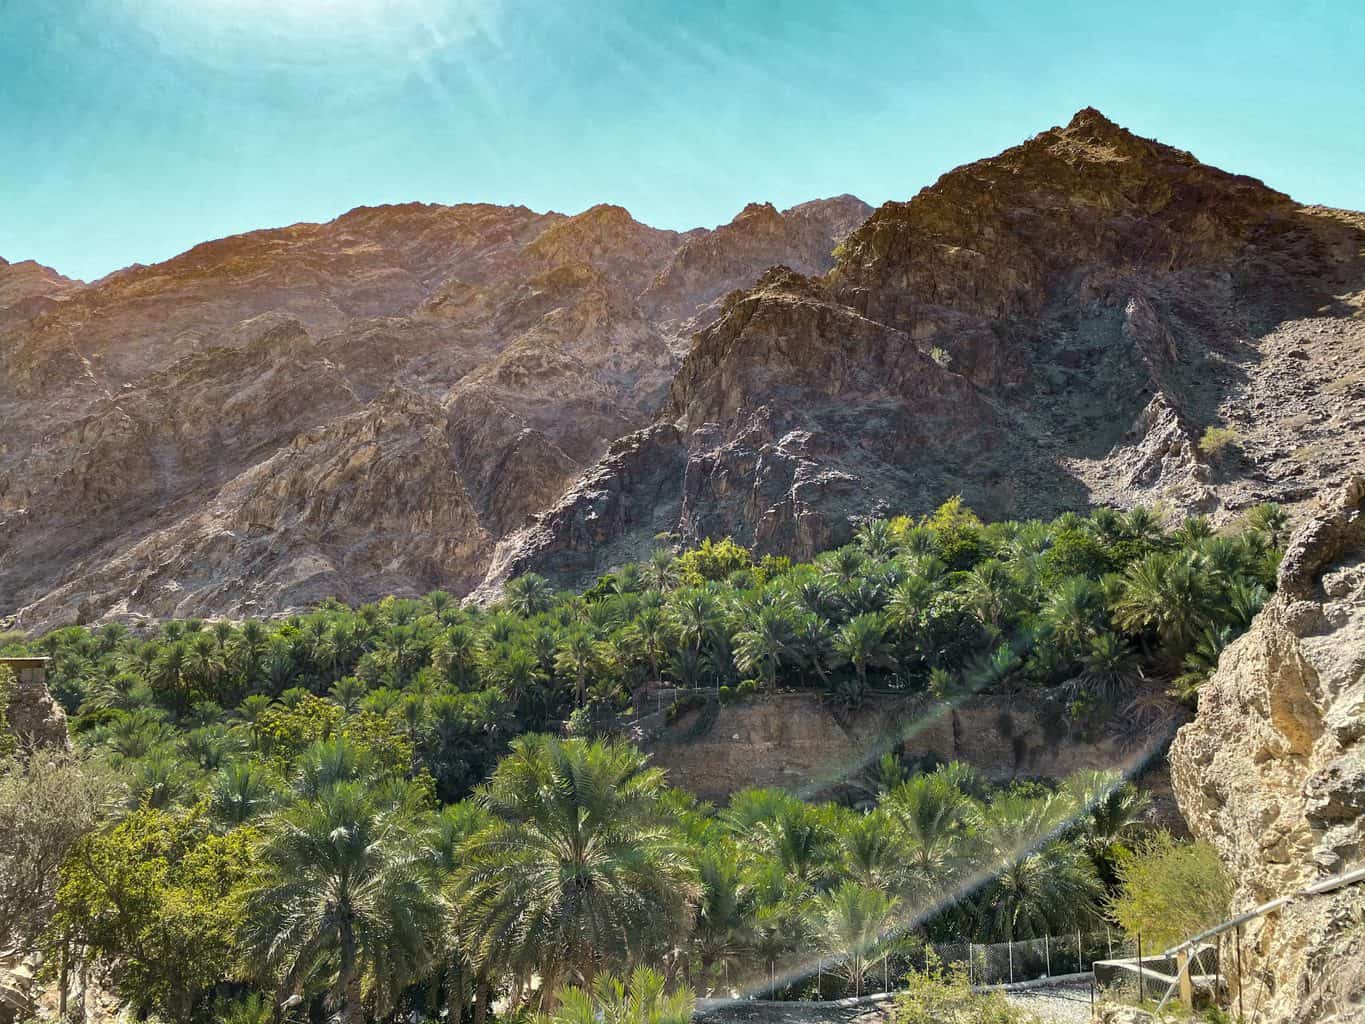 Views of palm trees and farms in the village on the Wadi Shees Nature Trail